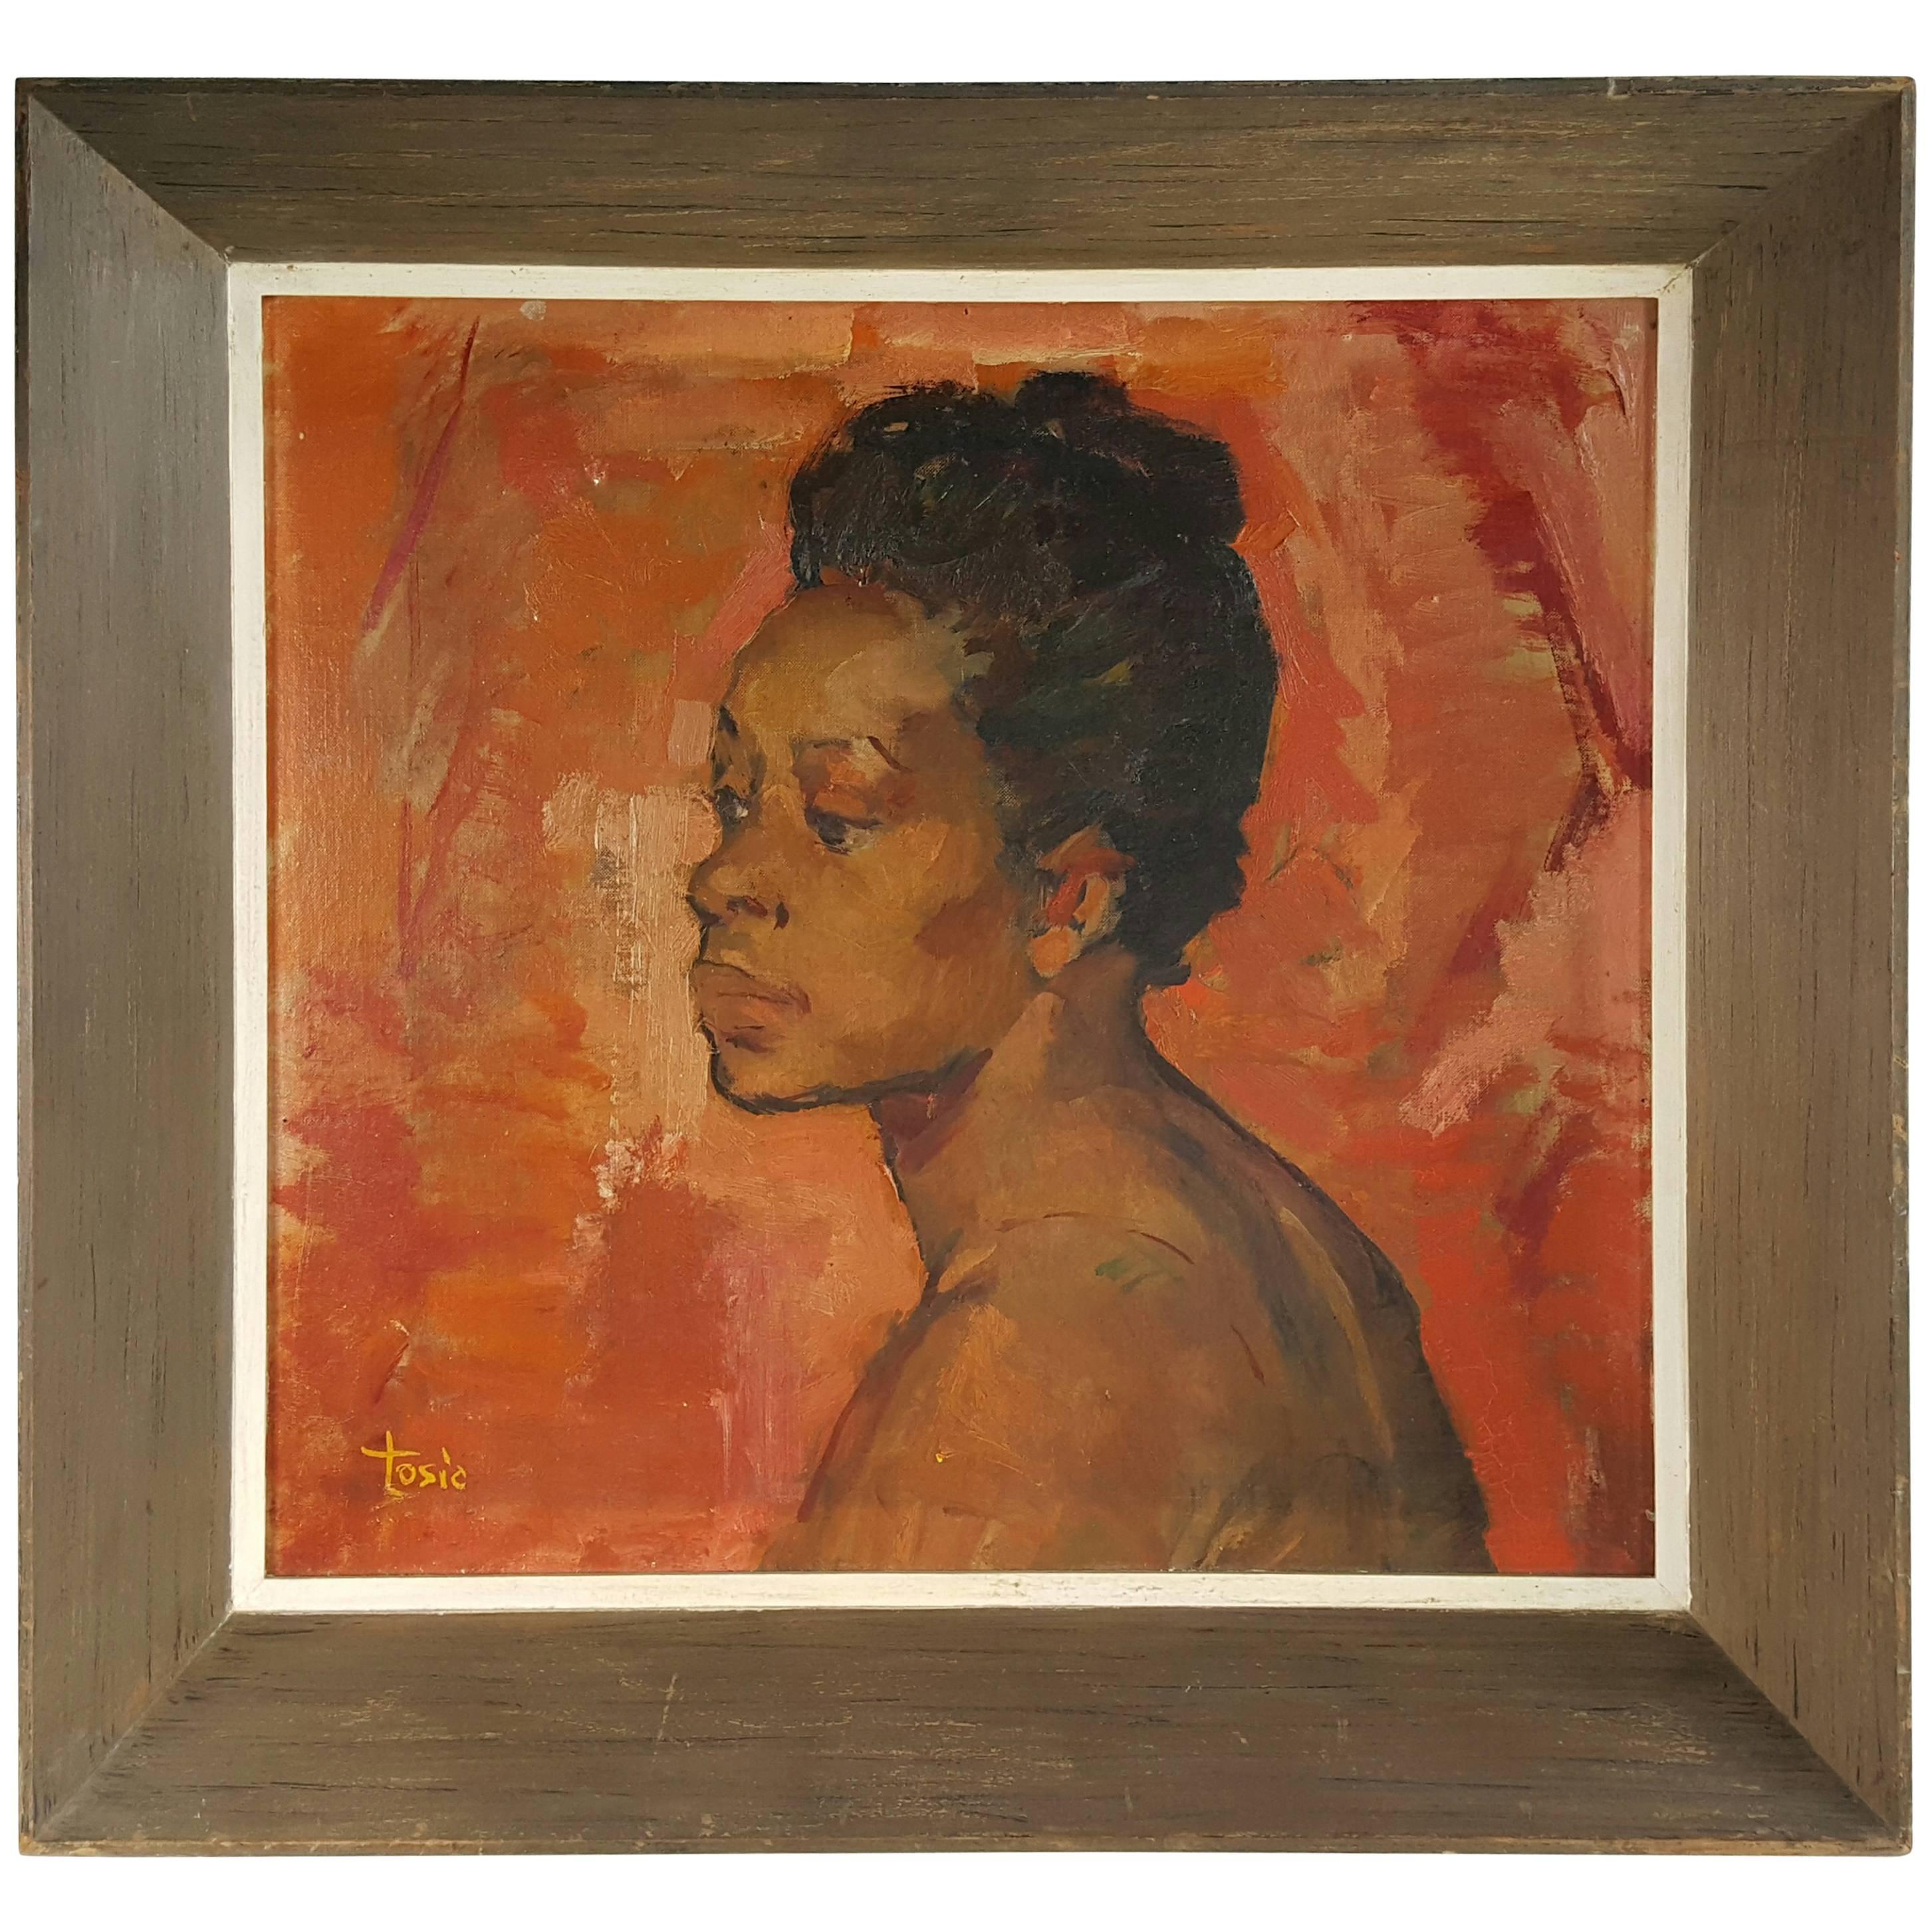 Modernist Oil Painting on Board by Budimir D. Tosic "Portret, 1950 For Sale